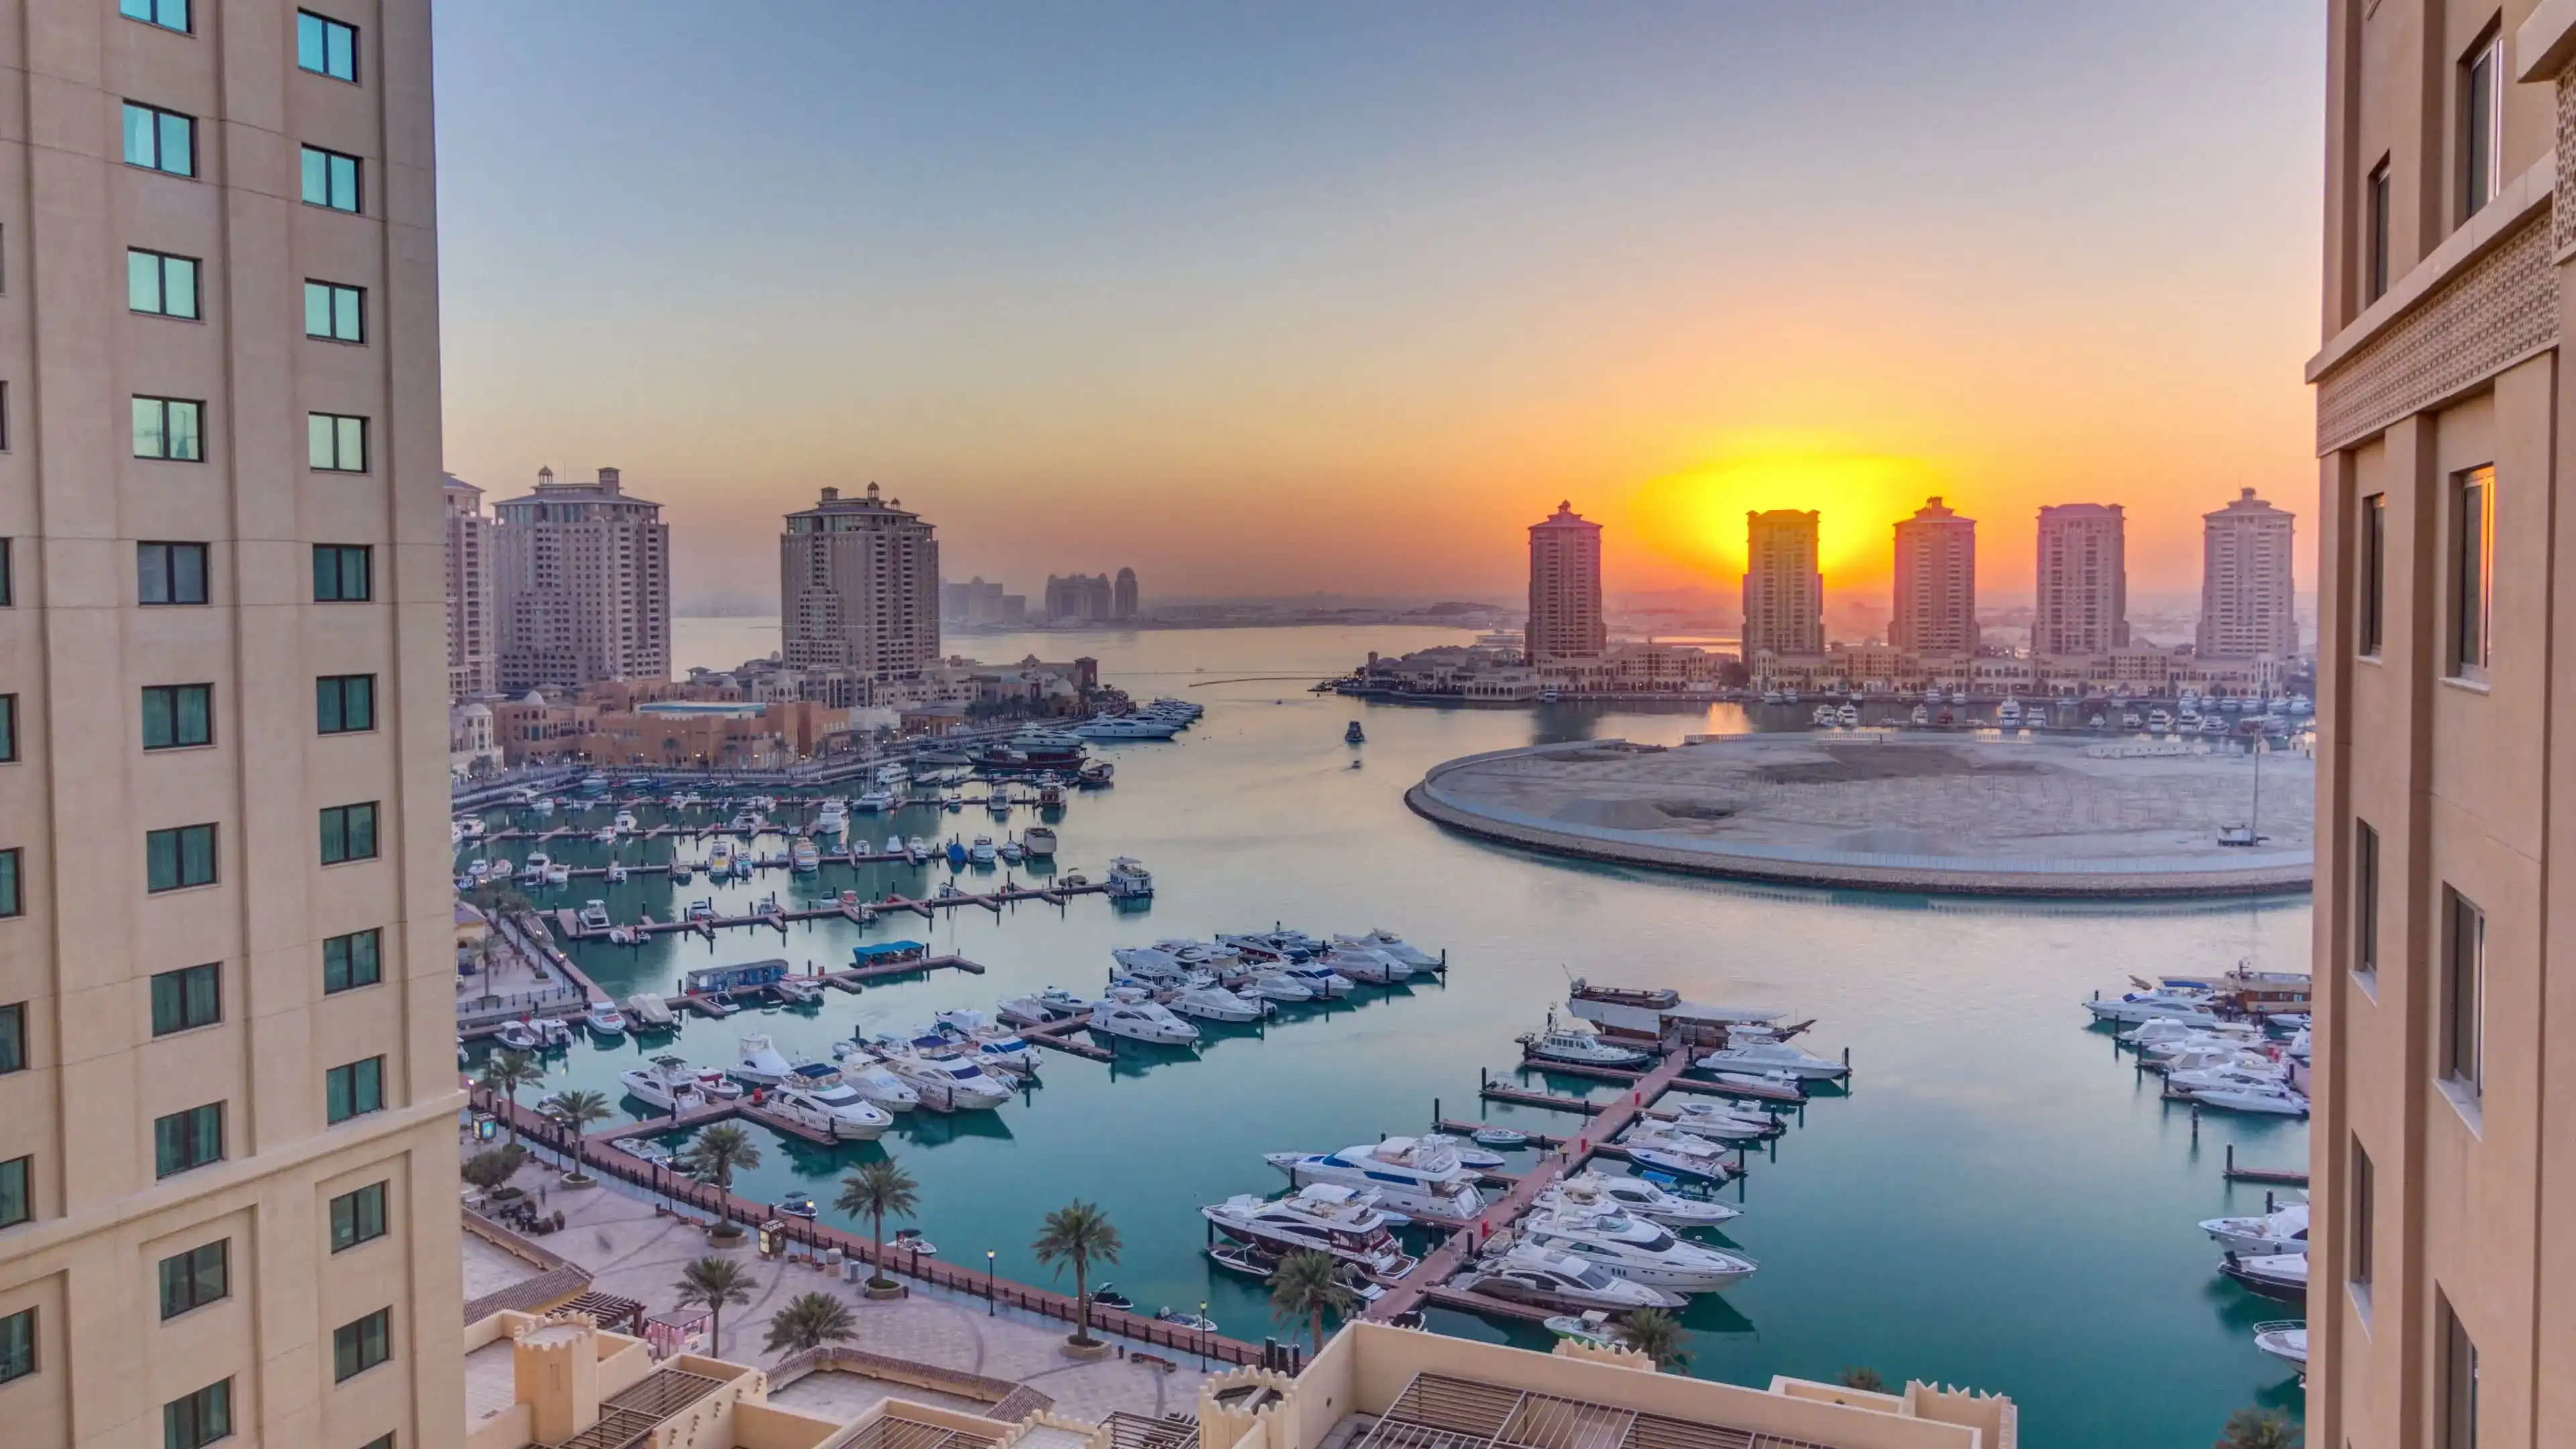 Sunset at the Pearl-Qatar timelapse from top. It is an artificial island in Qatar. View of the Marina and residential buildings in Porto Arabia in Doha, Qatar, Middle East